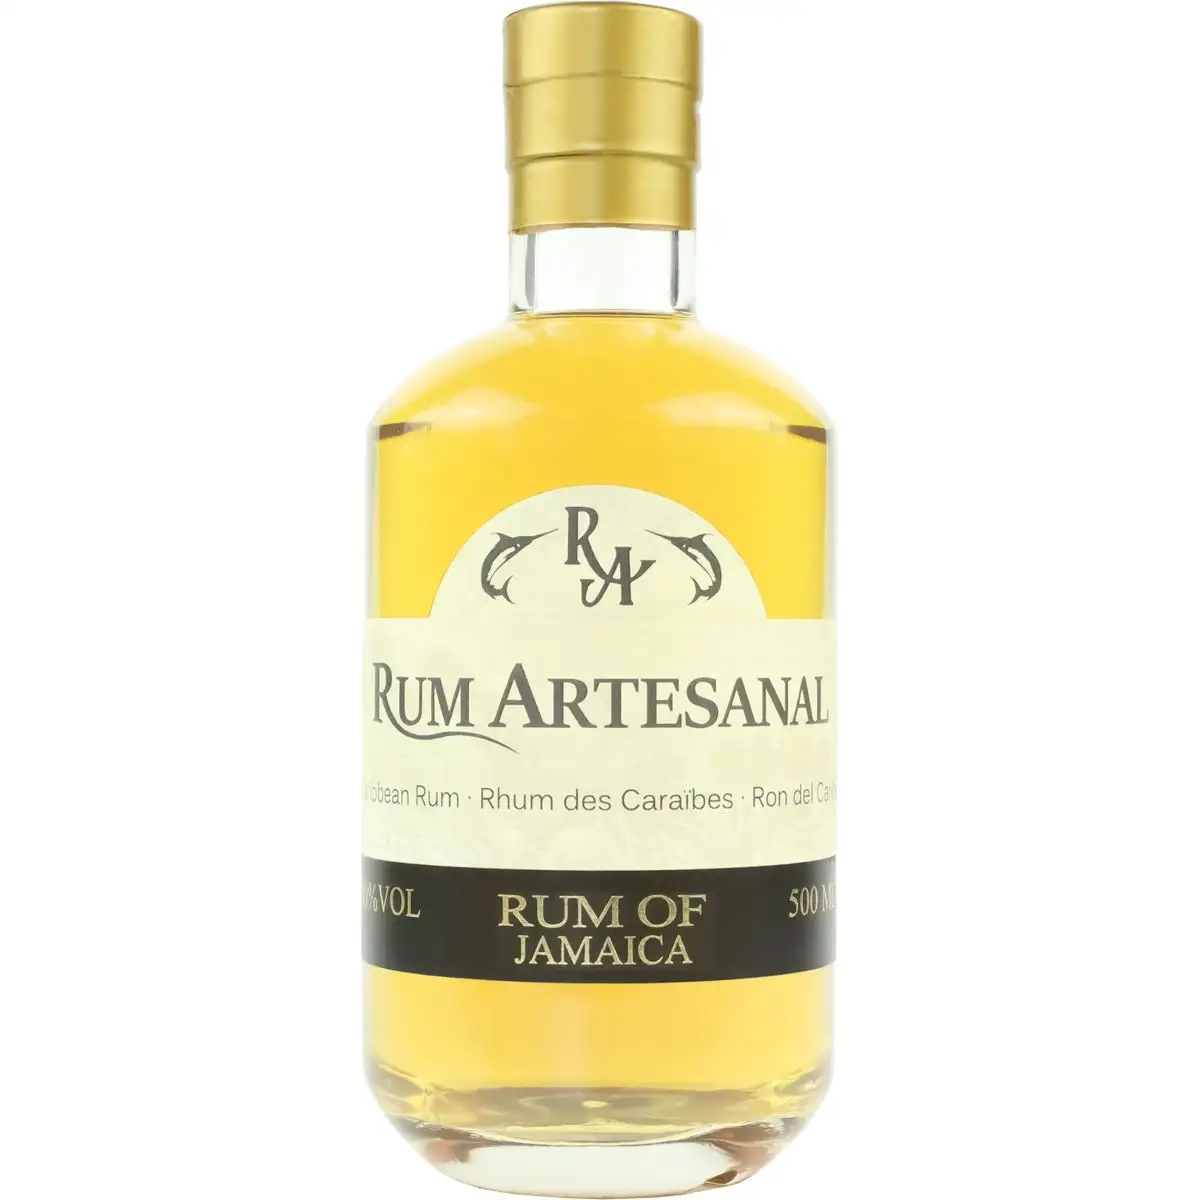 Image of the front of the bottle of the rum Rum Artesanal Rum of Jamaica